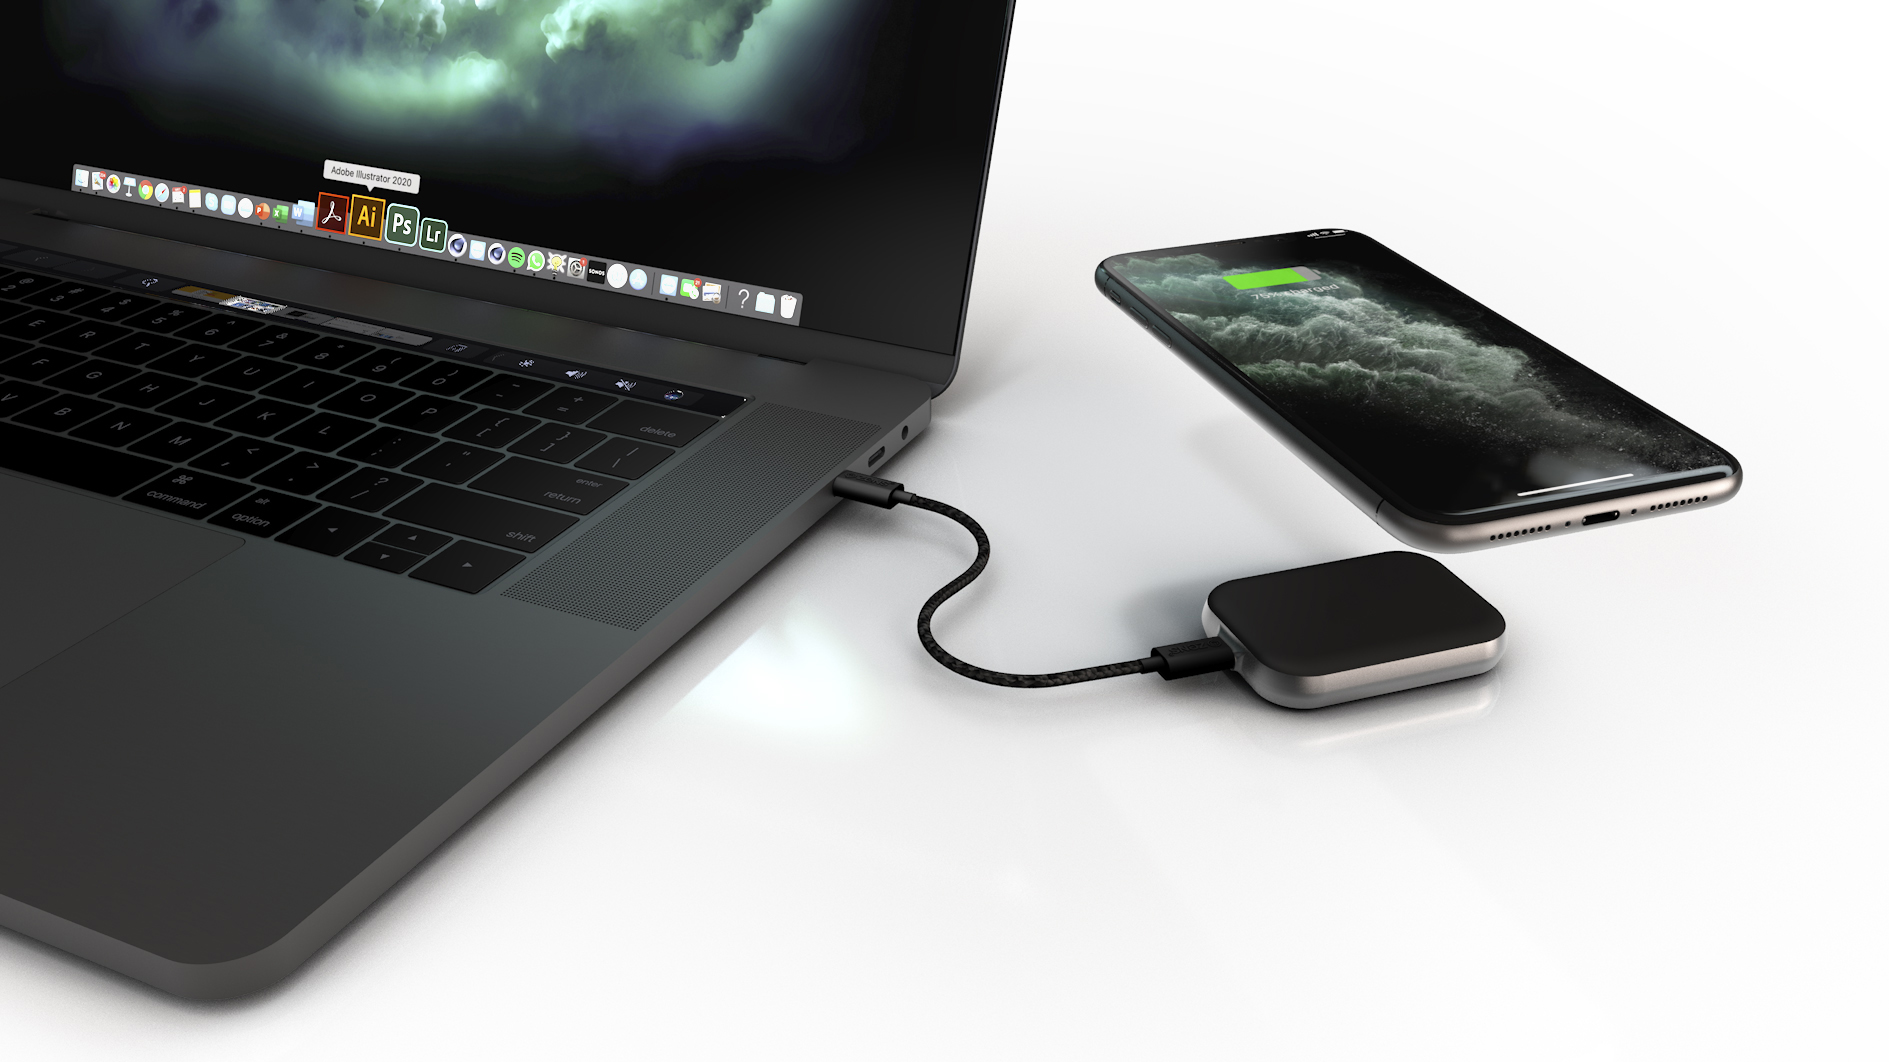 ZENS Aluminium USB-C Stick for AirPods connected to MacBook while charging iPhone